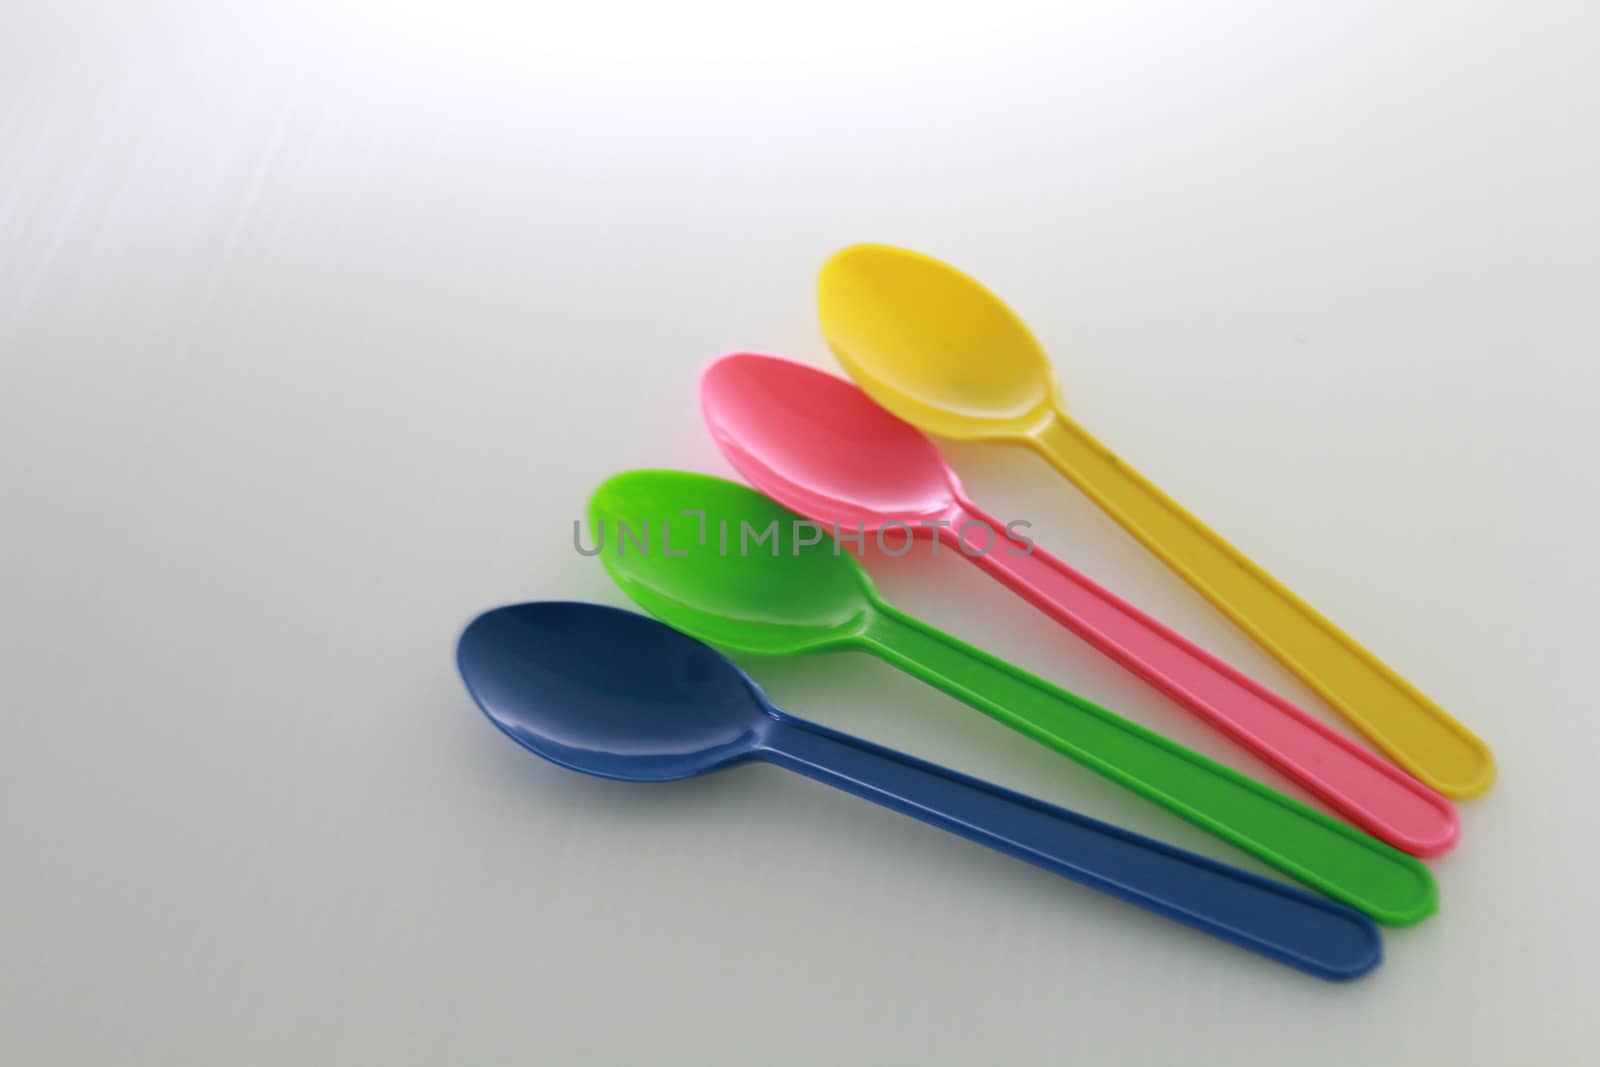 There are colour plastic spoons use for eating icecream and desert.